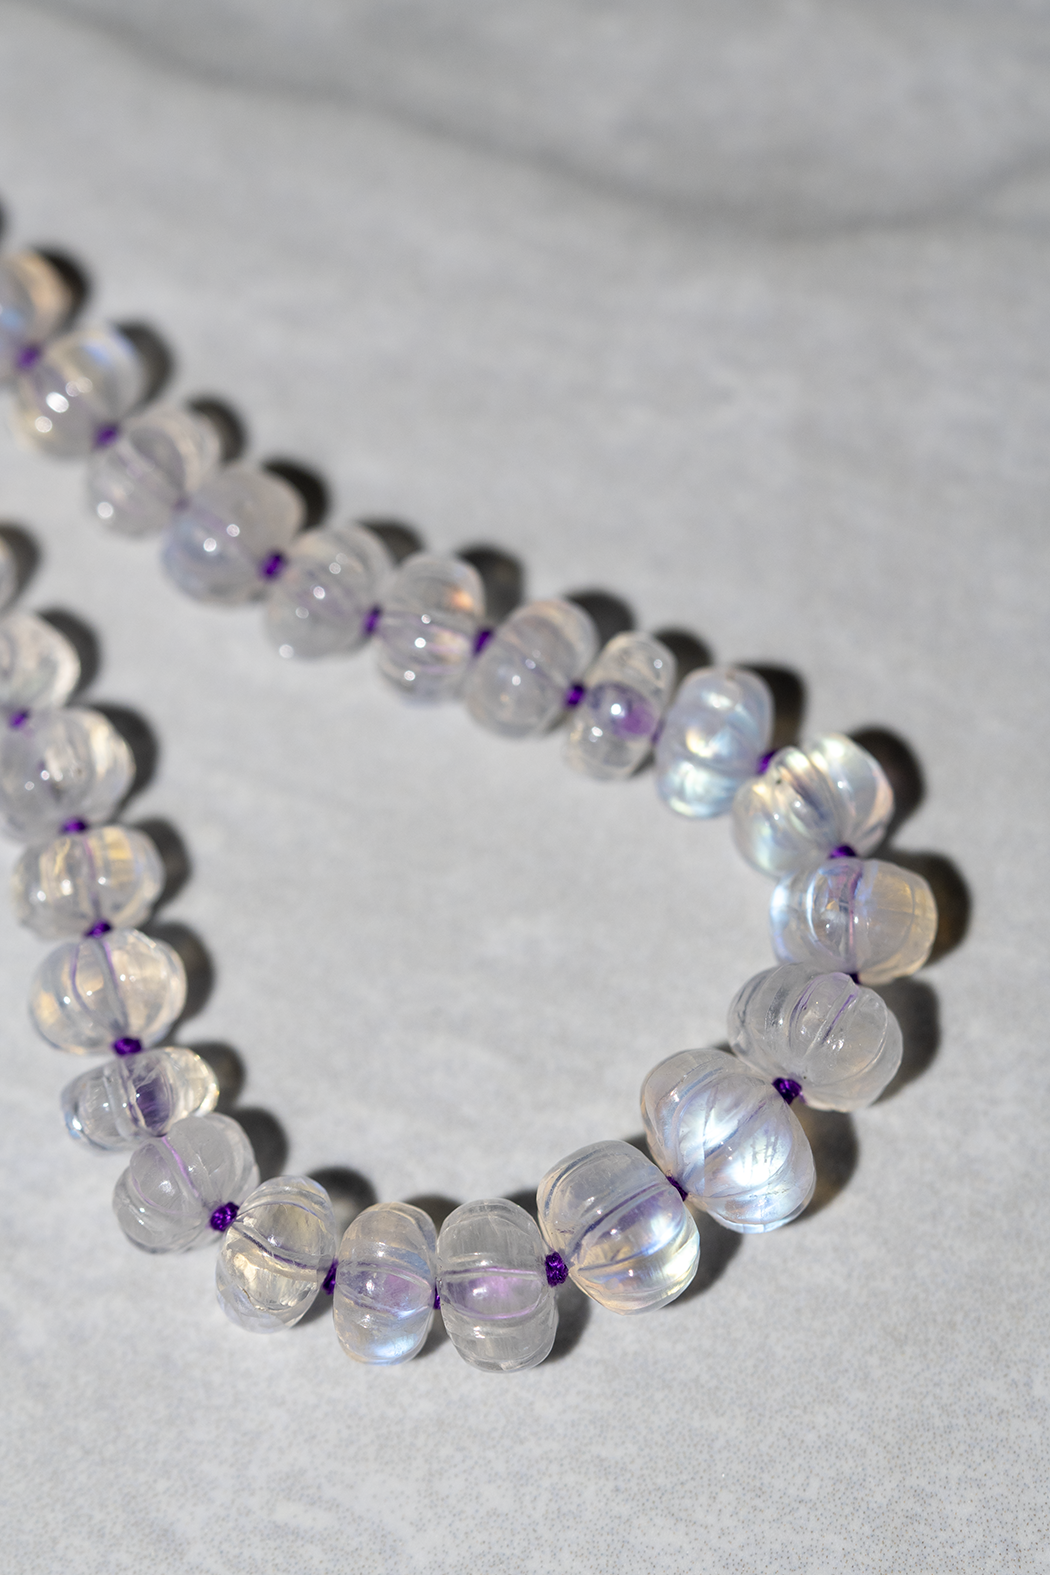 Rainbow Moonstone Knotted Bead Necklace 14k Gold